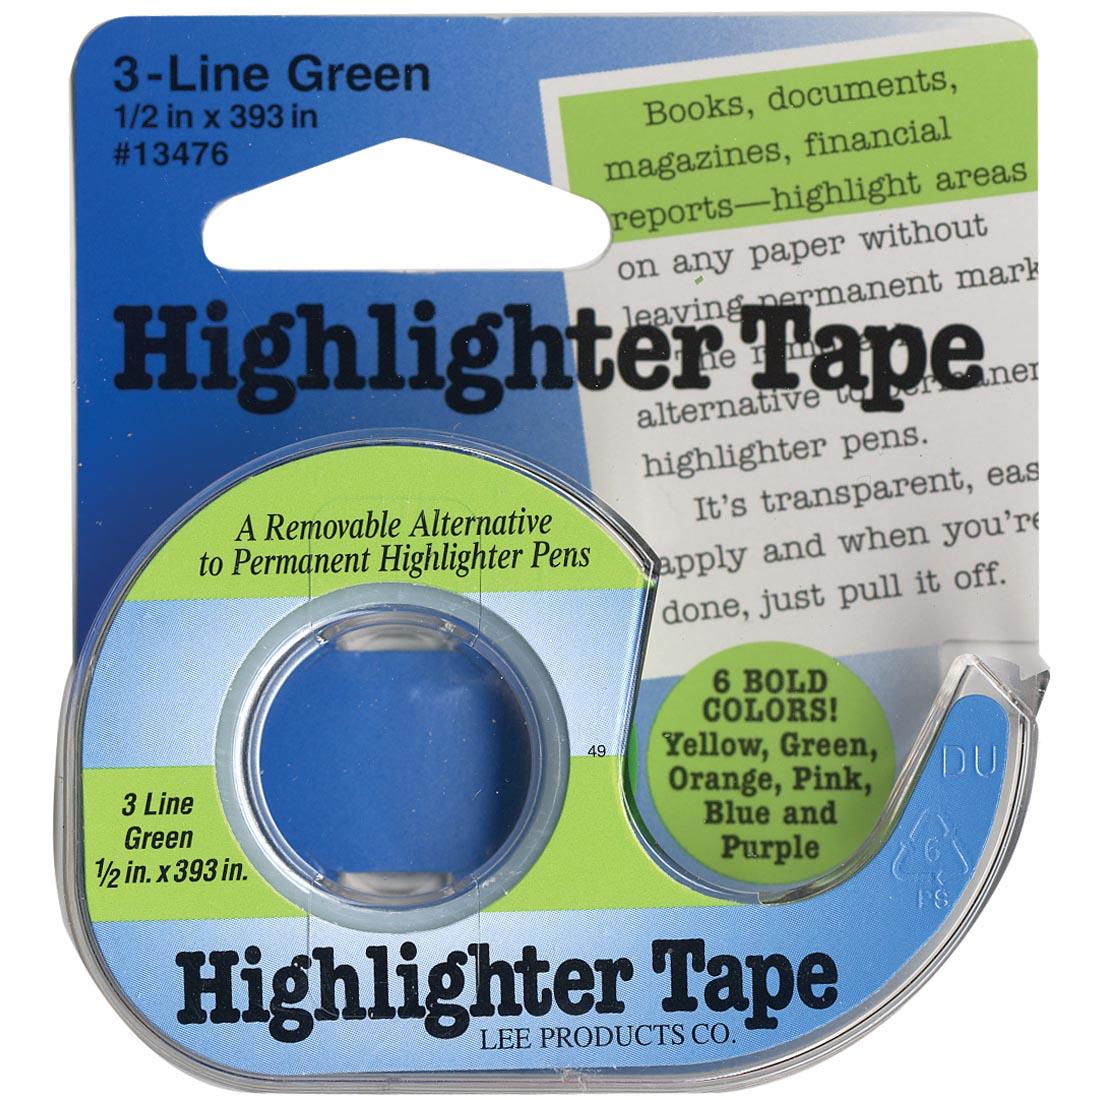 Lee Products Green Highlighter Tape